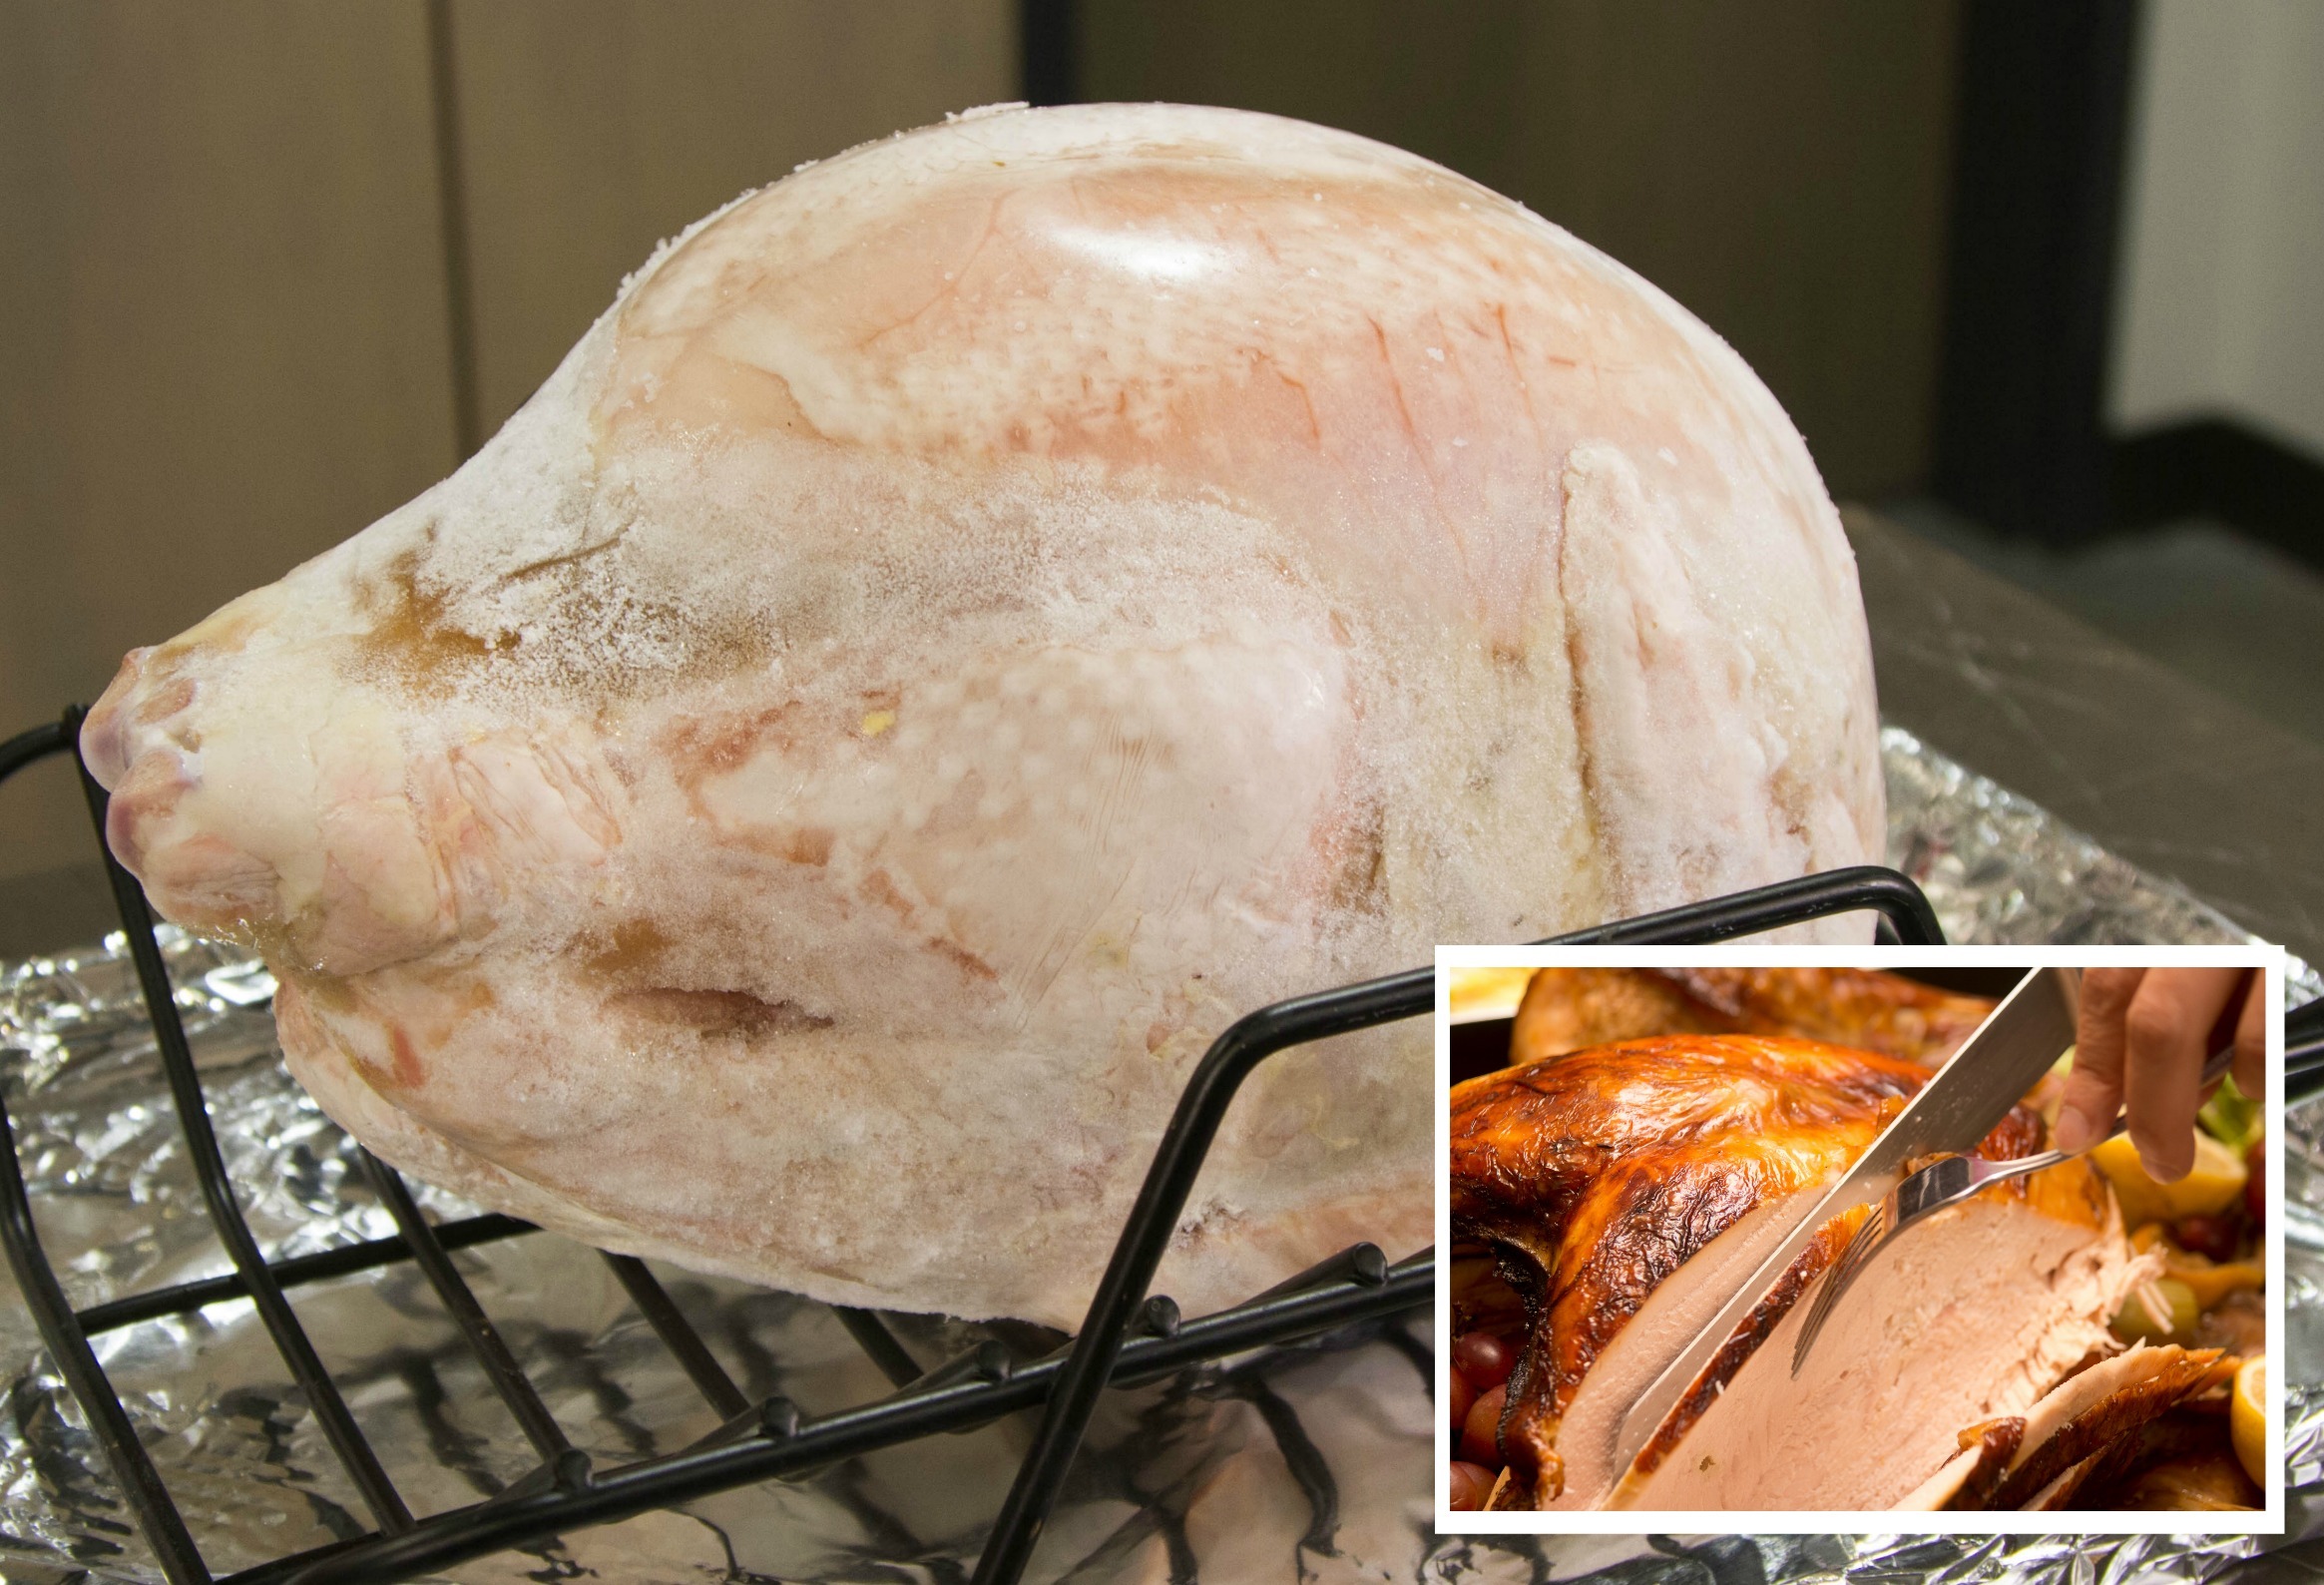 Turkey 911: How to Cook a Frozen Turkey | ThermoWorks